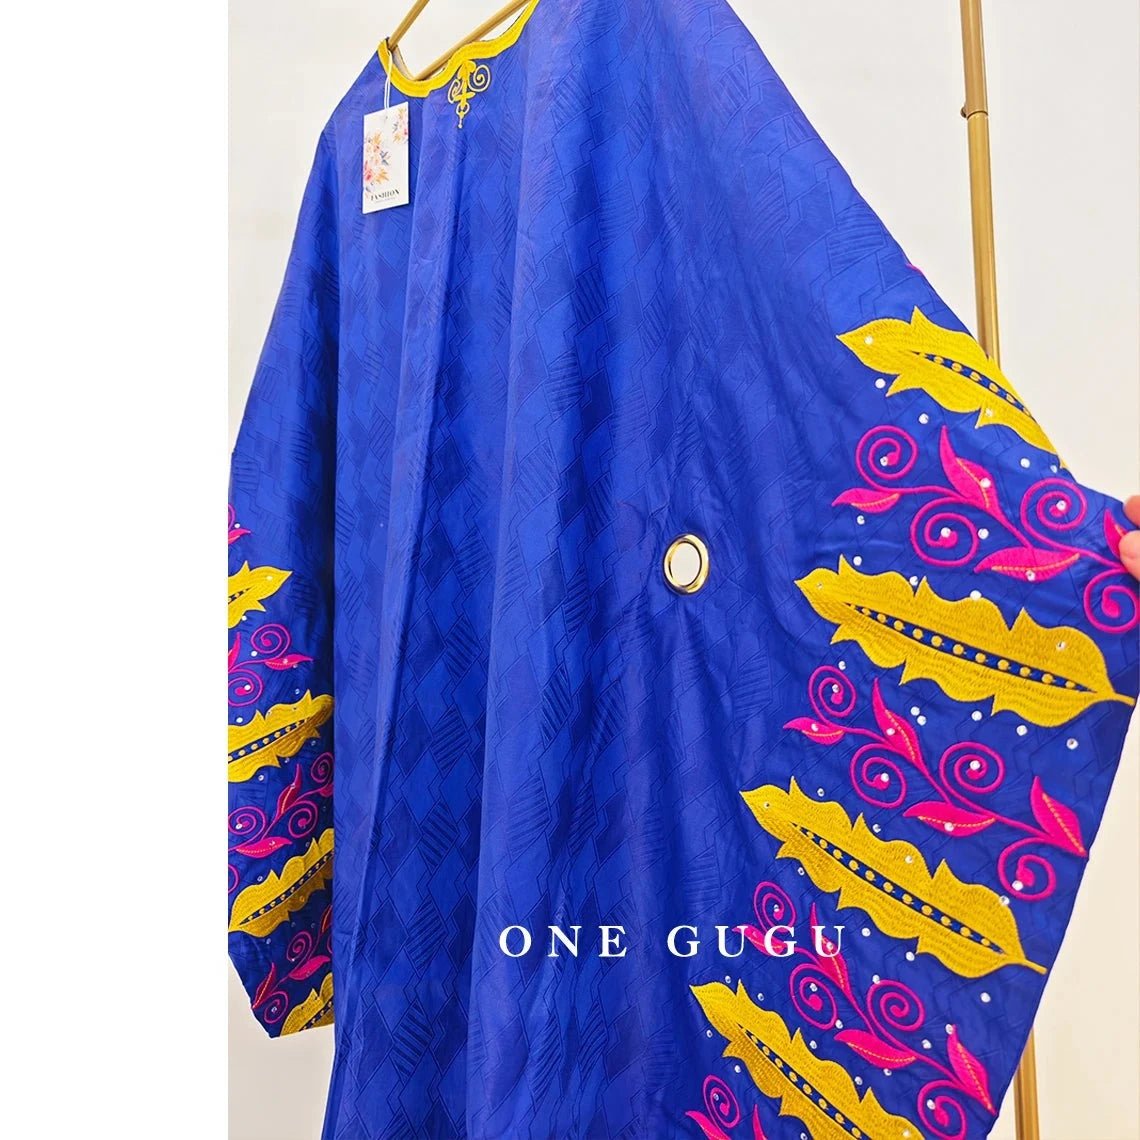 Elegant Royal Blue Bazin Riche Boubou: High-Quality African Dress for Women - Flexi Africa - Flexi Africa offers Free Delivery Worldwide - Vibrant African traditional clothing showcasing bold prints and intricate designs